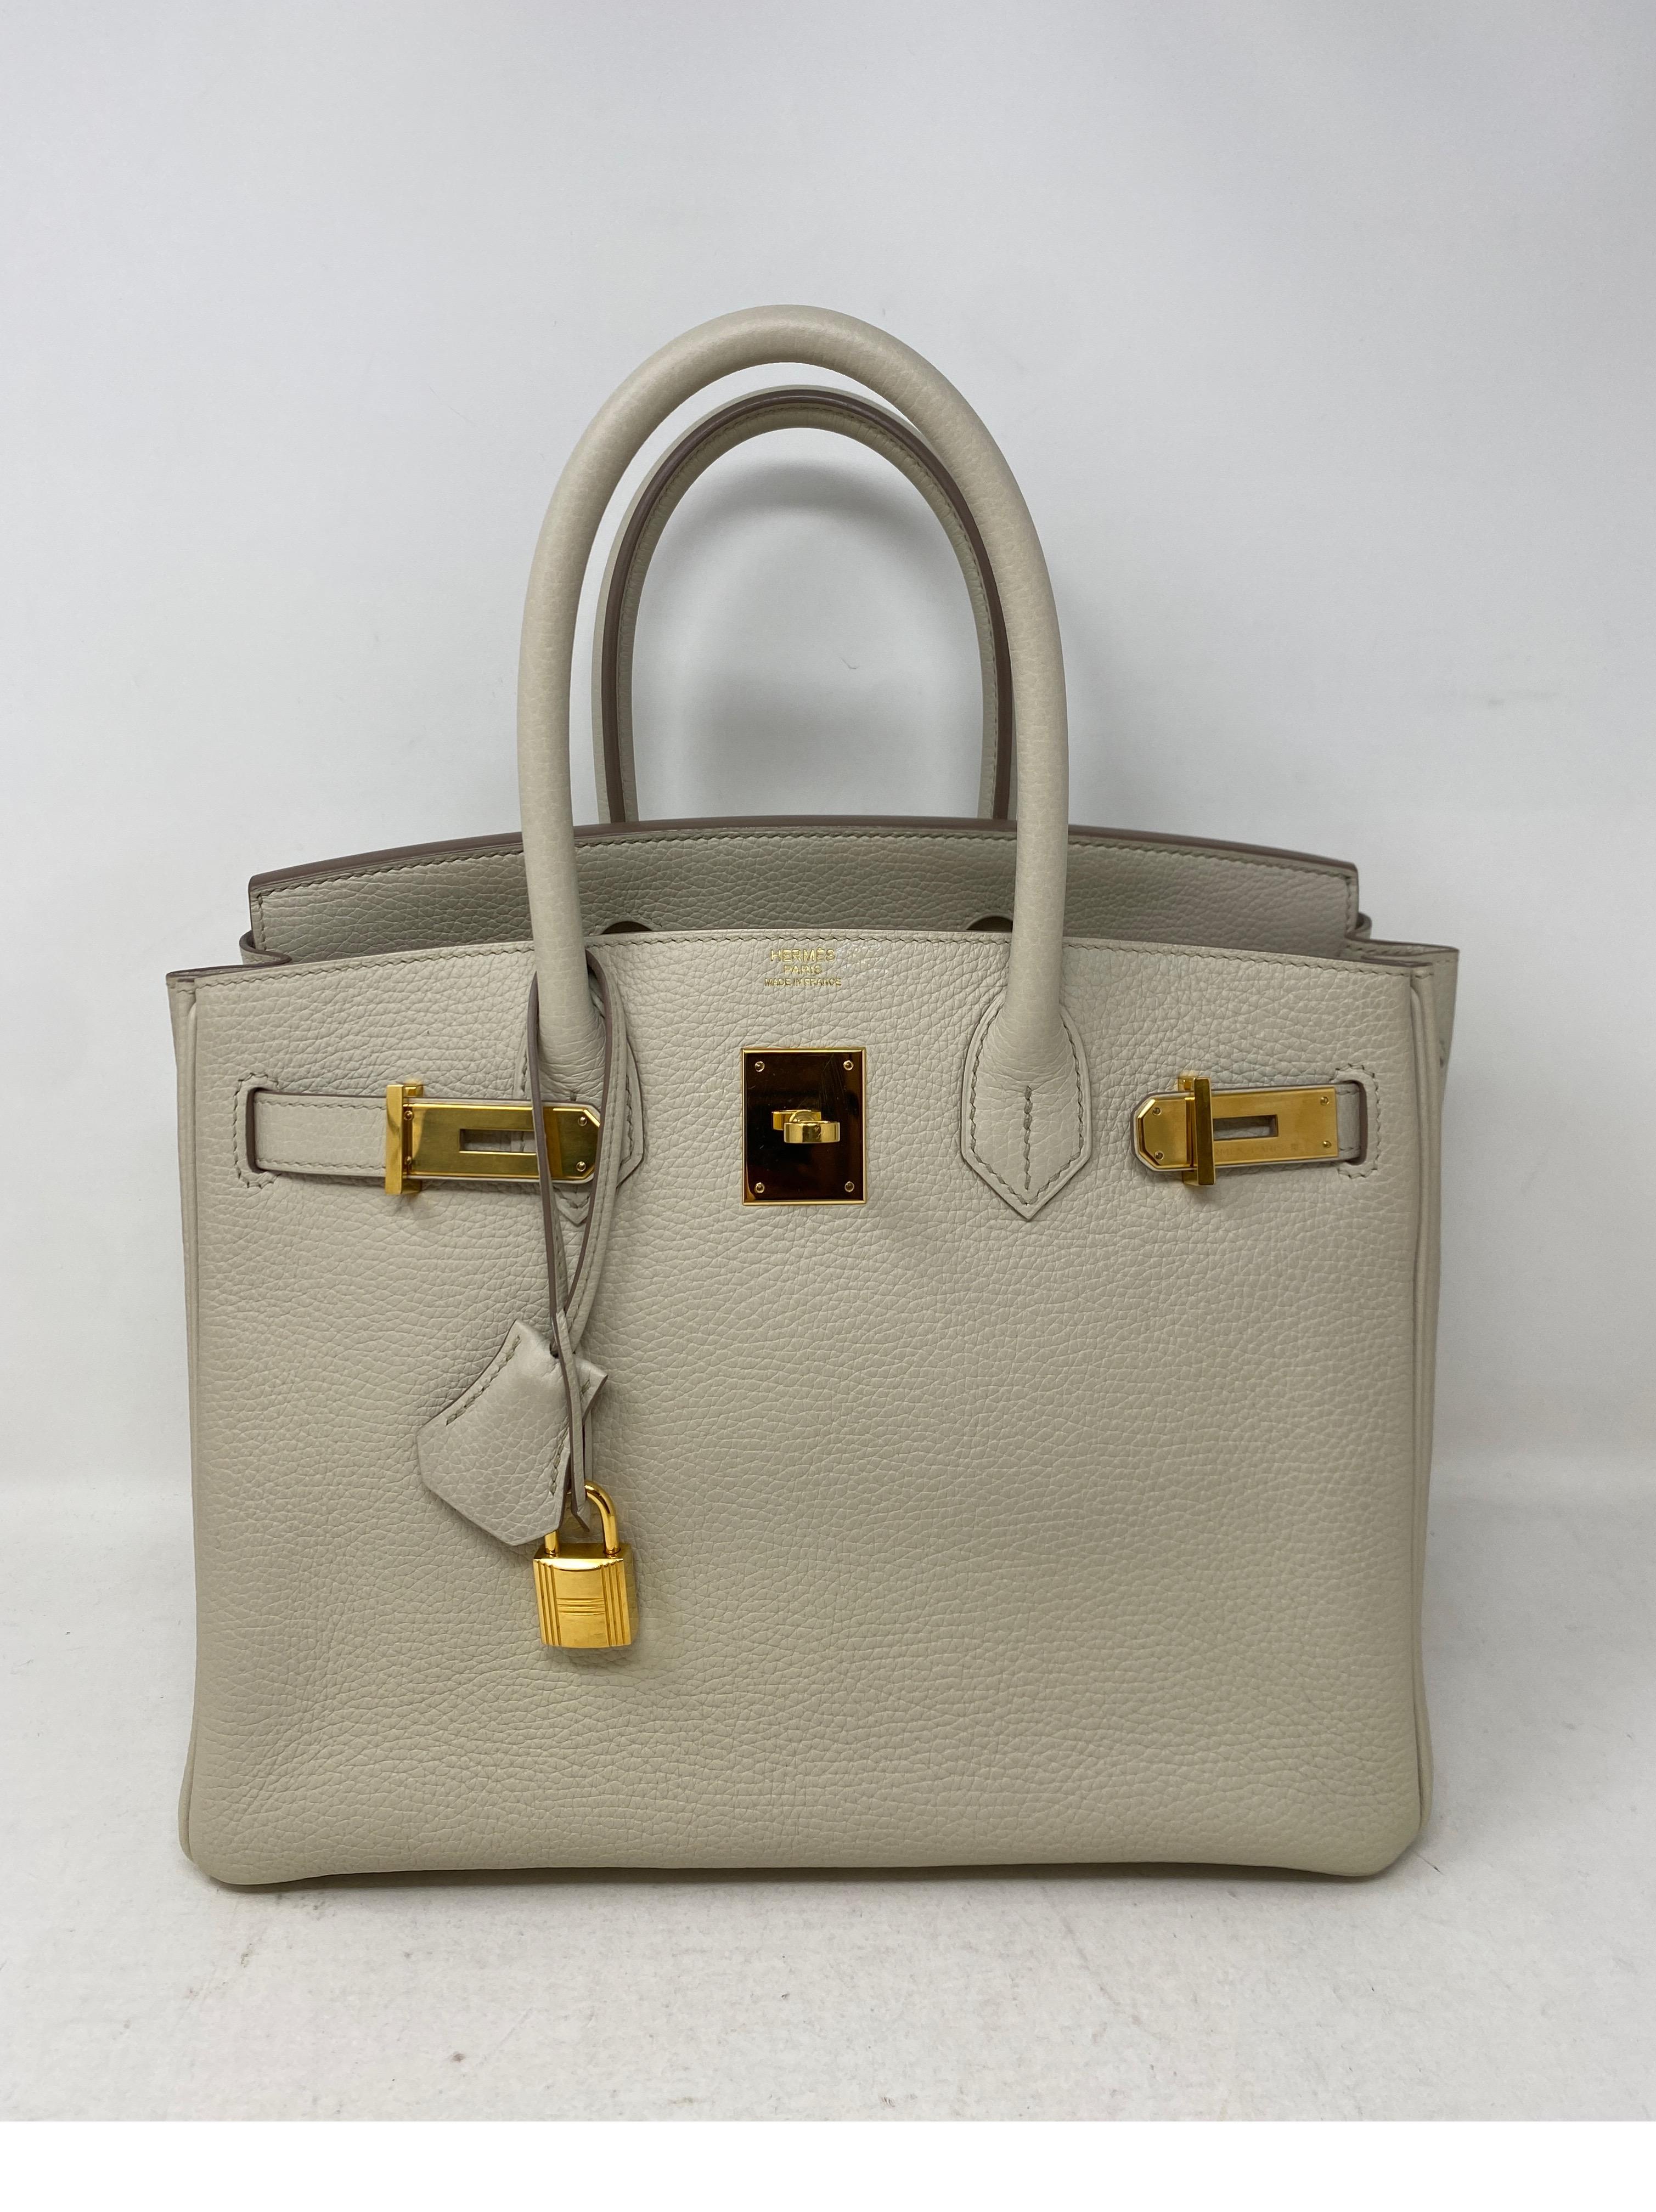 Hermes Beton Birkin 30 Bag. Looks similar to Craie in color. Very sought after color. Beautiful bag in neutral and gold hardware. Highly coveted 30 size. Looks like new. Includes clochette, lock, keys, and dust cover. Guaranteed authentic. 